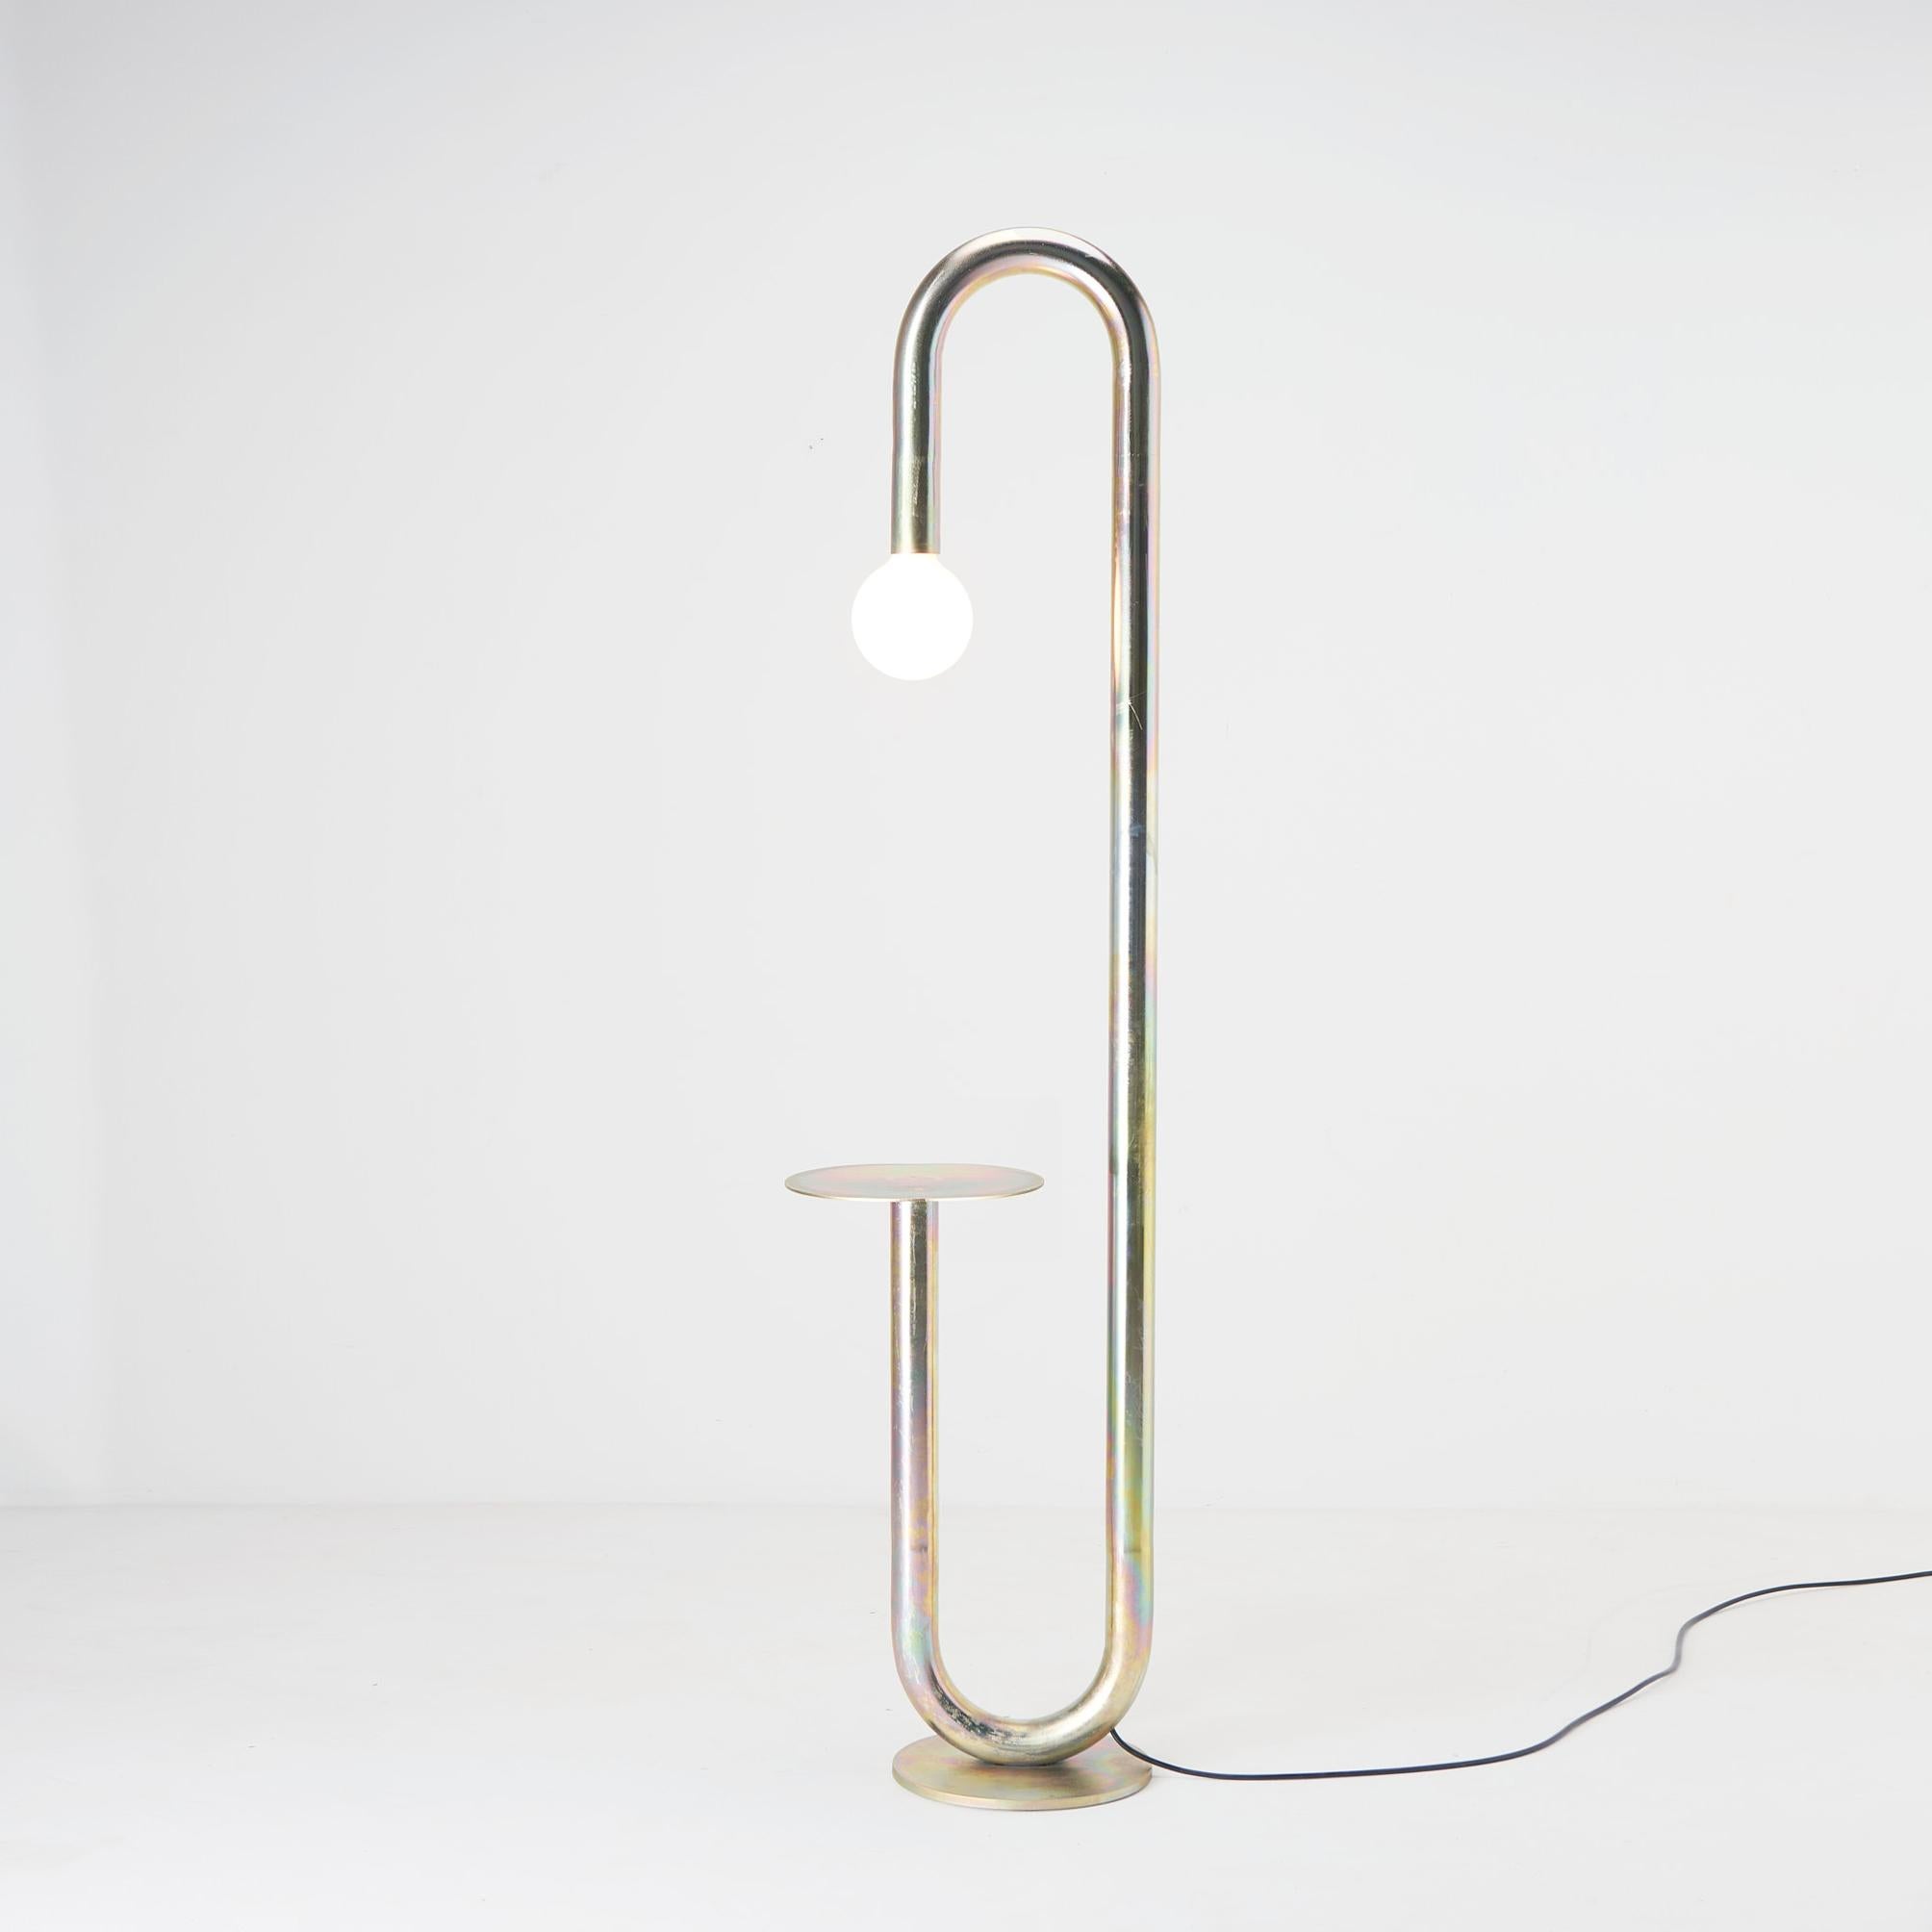 Curva Zincada floor lamp by Cultivado Em Casa
Dimensions: 27 x 38 x 160 cm 
Materials: Zinc

A common item in steel houses, the 180º curve is the starting point for the development of the collection. Using this element of industrial origin and